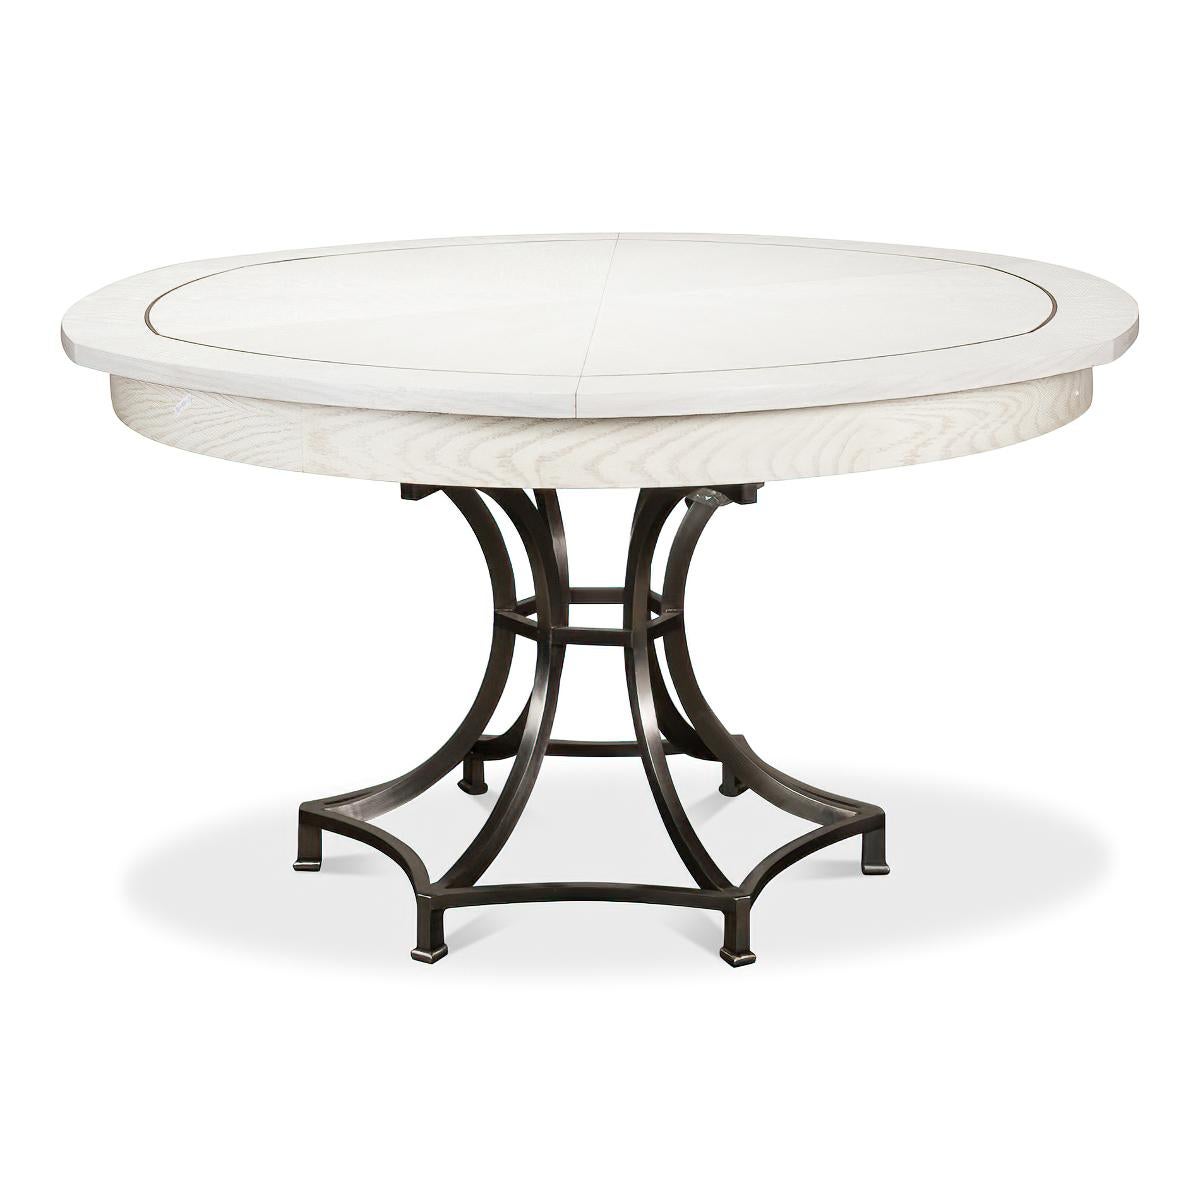 Contemporary Modern Industrial Round Dining Table, White Oak For Sale